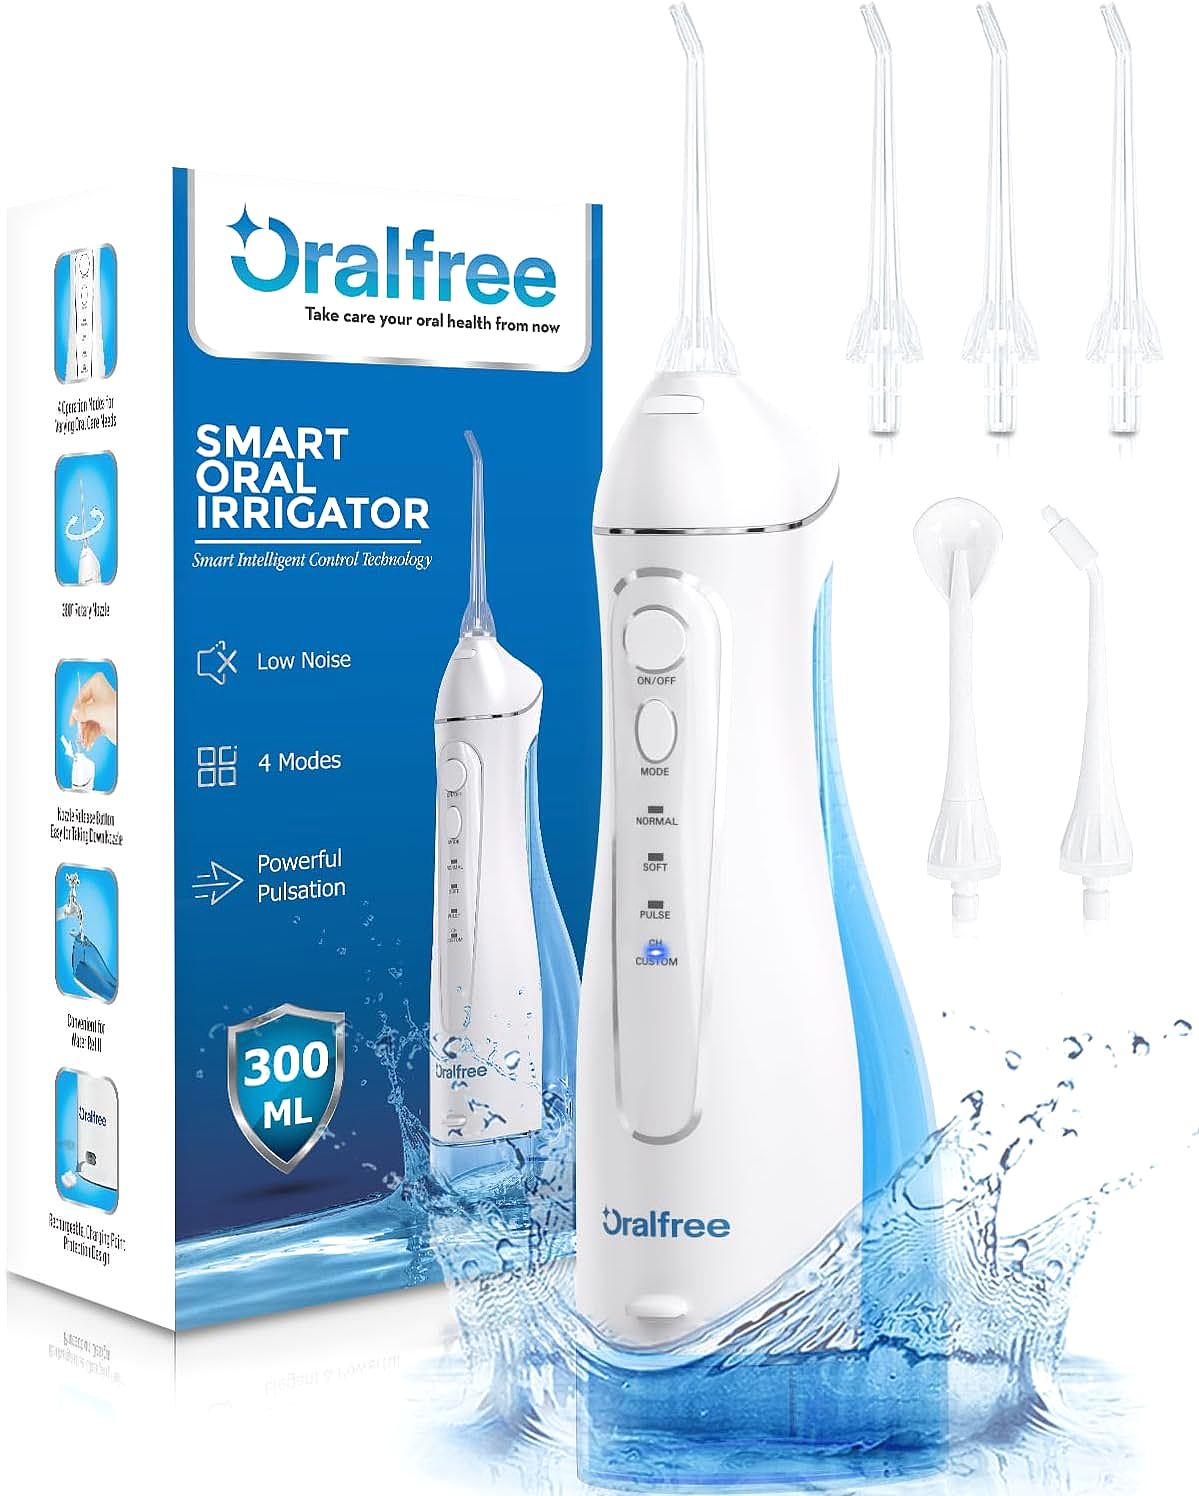 Oralfree F5025 Water Dental Flosser - The Game Changer for Healthy Smiles